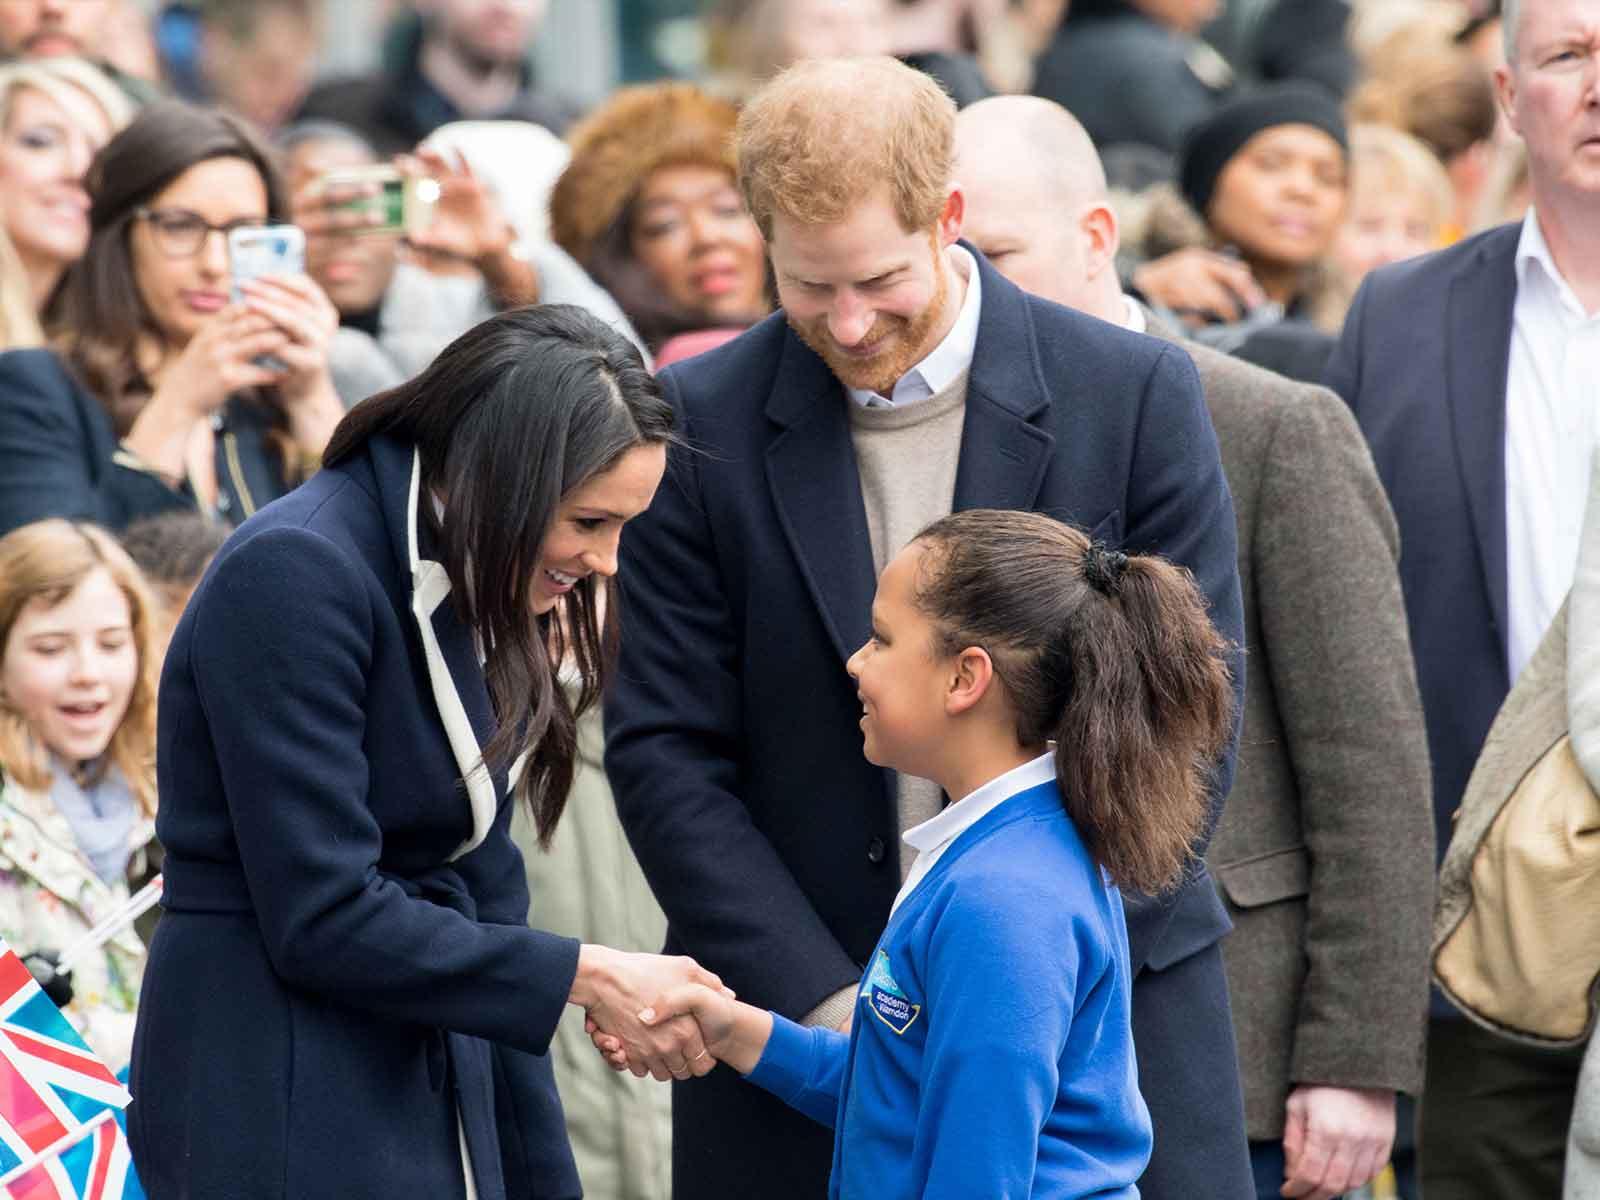 Prince Harry and Meghan Markle Support International Women’s Day